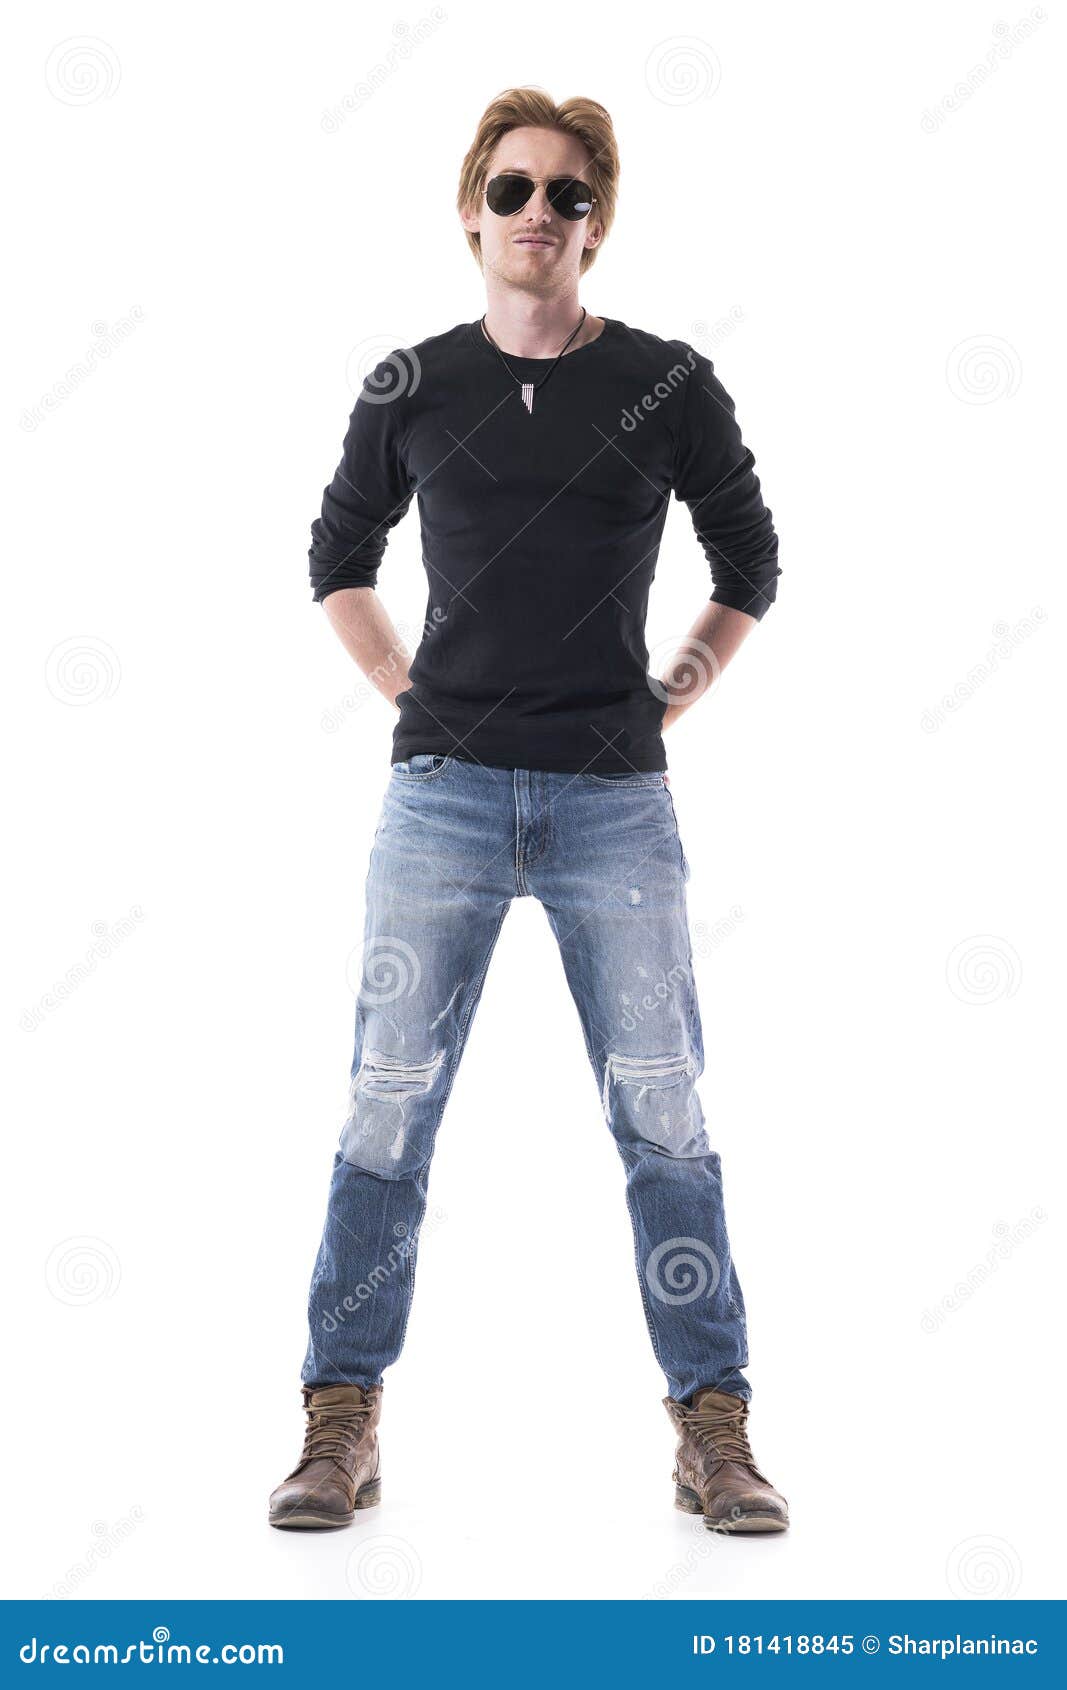 Handsome Ginger Young Stylish Man in Blank Black Shirt and Ripped Jeans ...